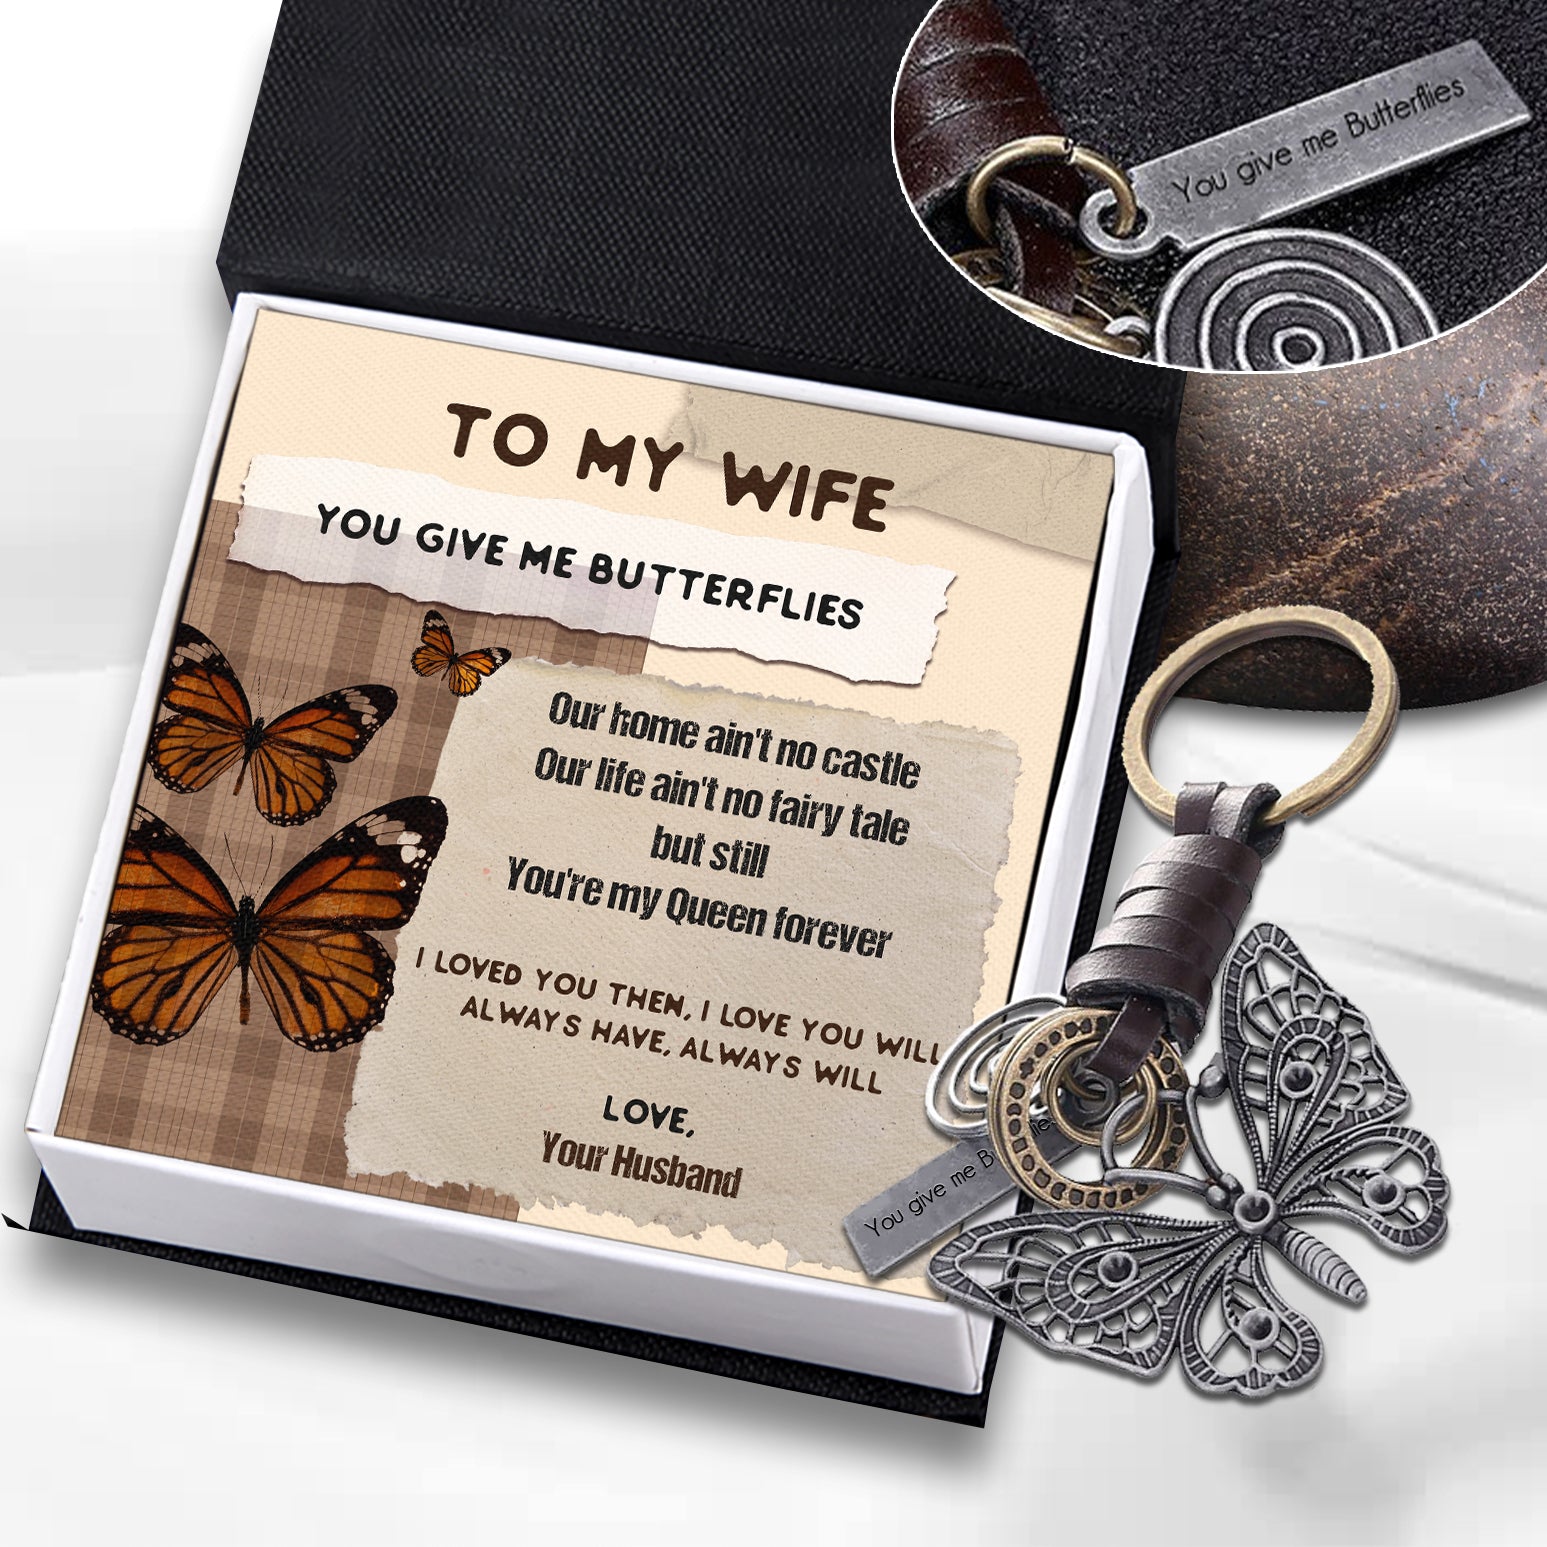 Butterfly Vintage Keychain - Butterfly - To My Wife - You're My Queen Forever - Ukgkwc15001